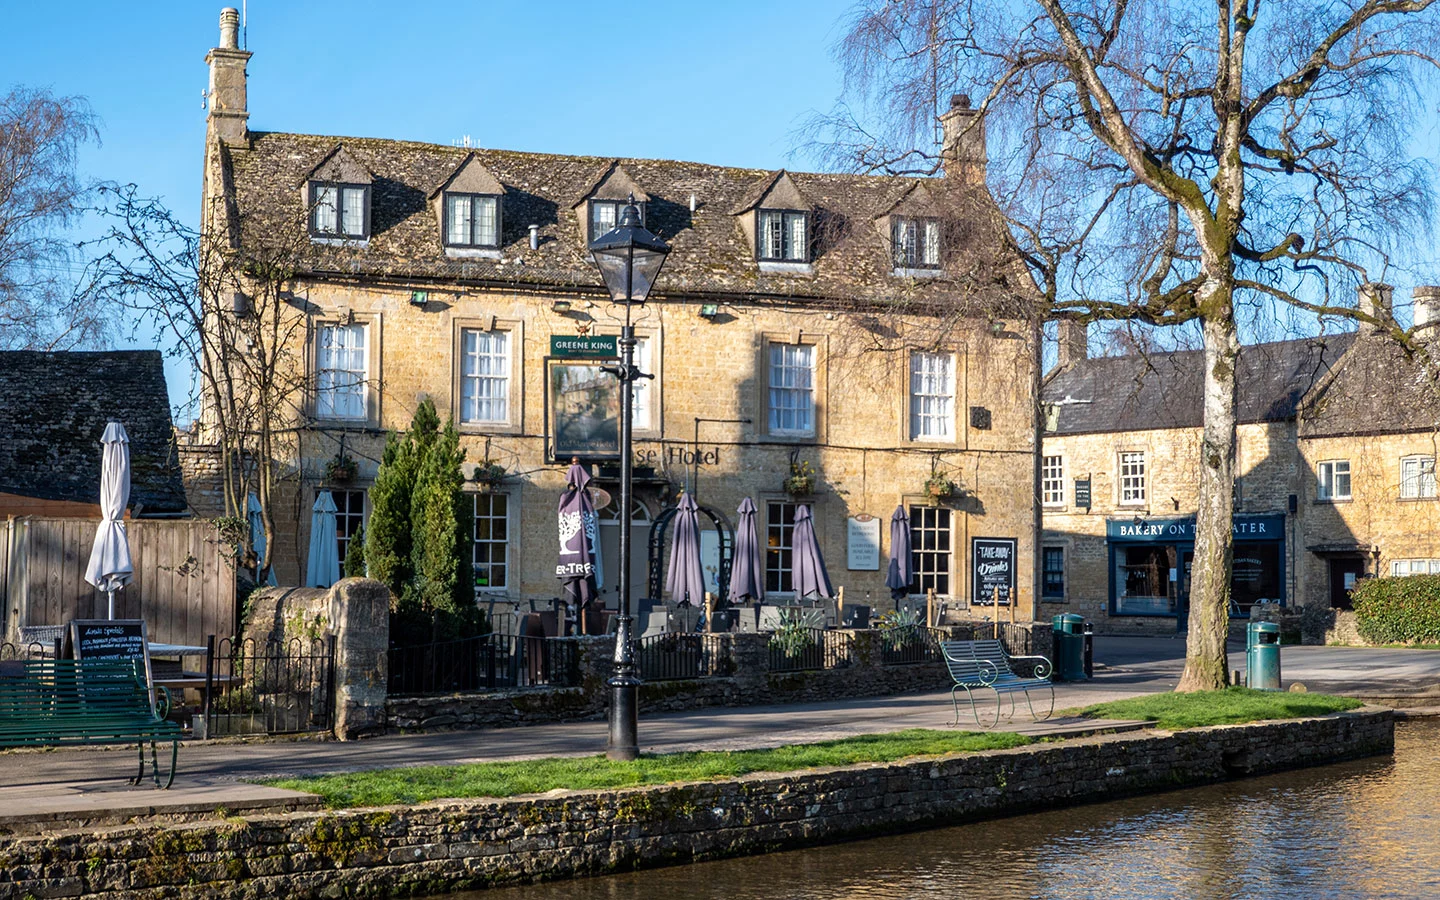 The Old Manse pub by the River Windrush in Bourton-on-the-Water